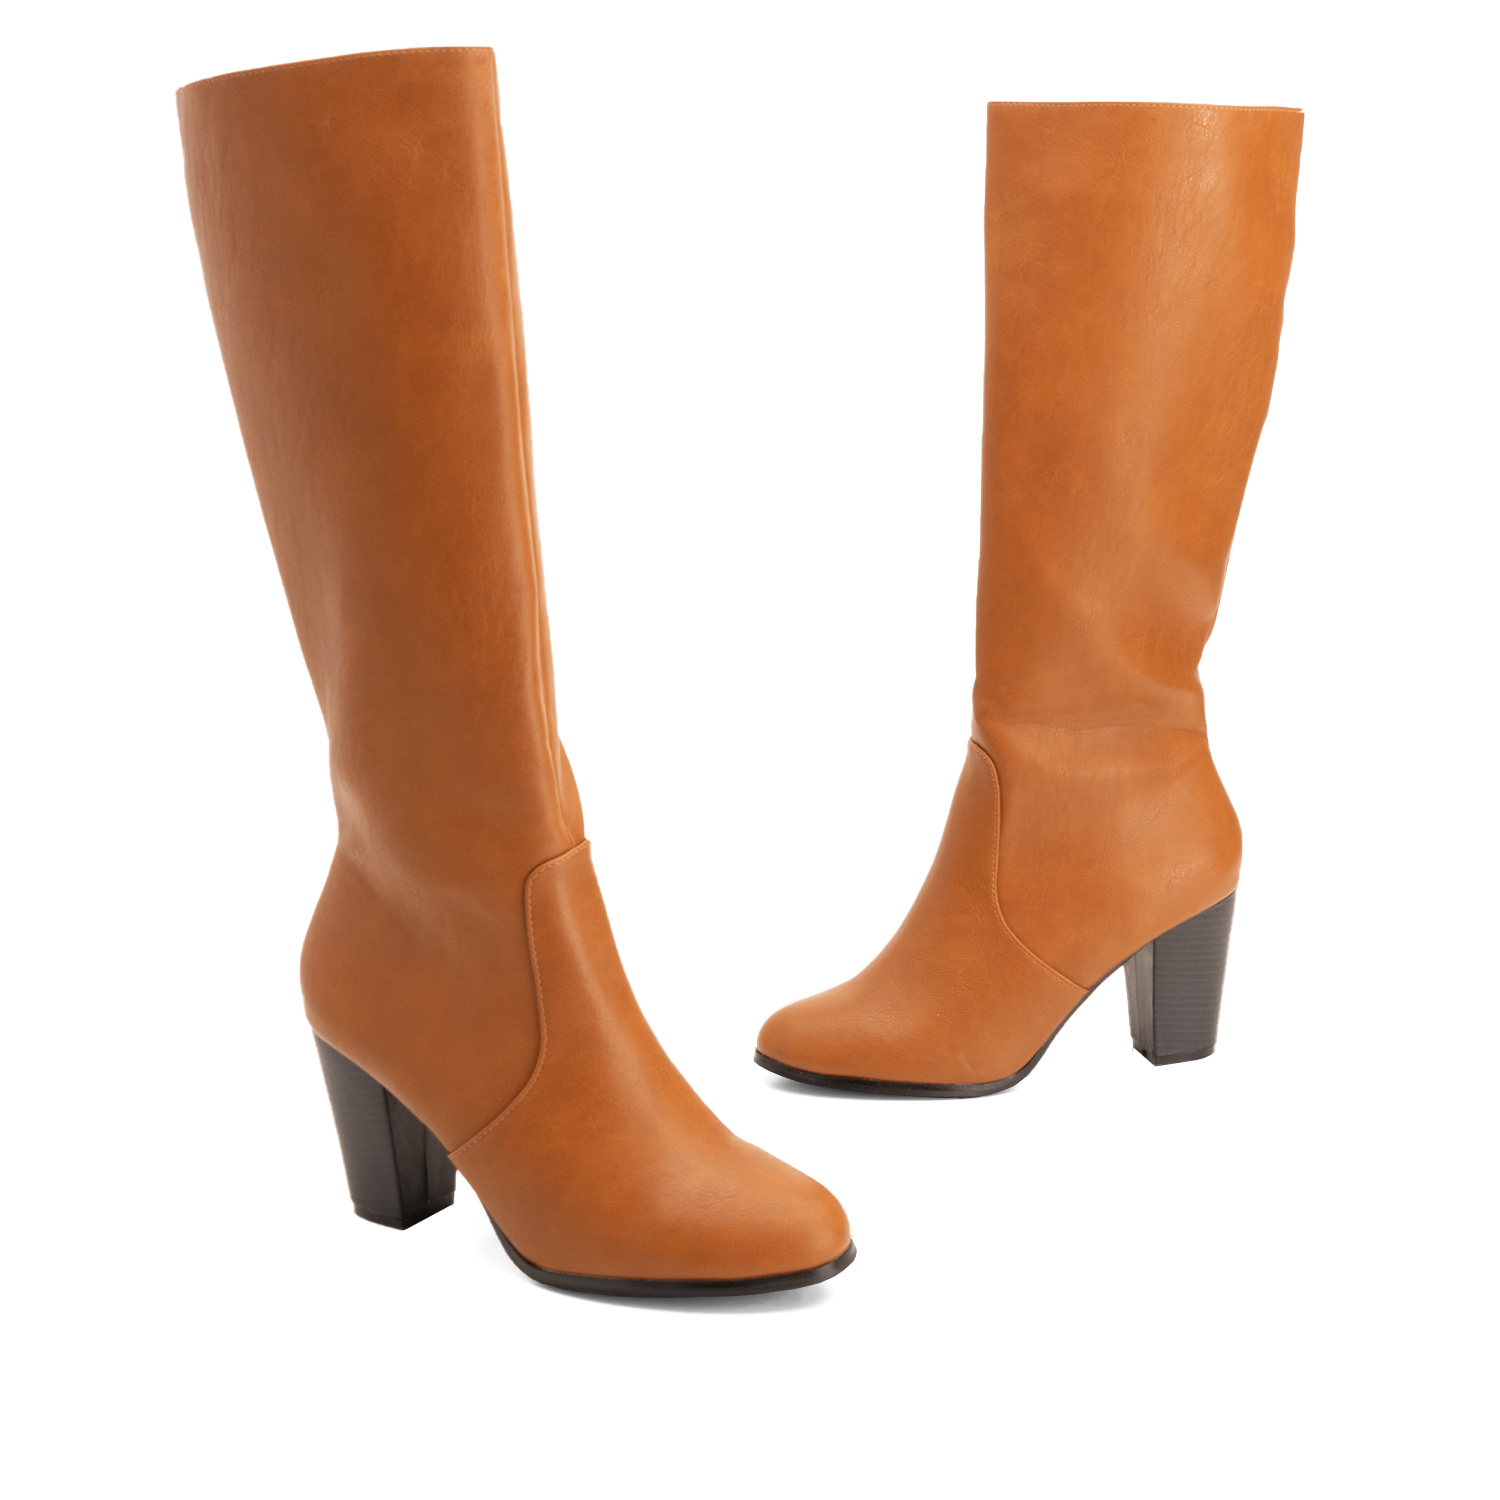 Heeled knee-high-calf boots in camel faux leather 